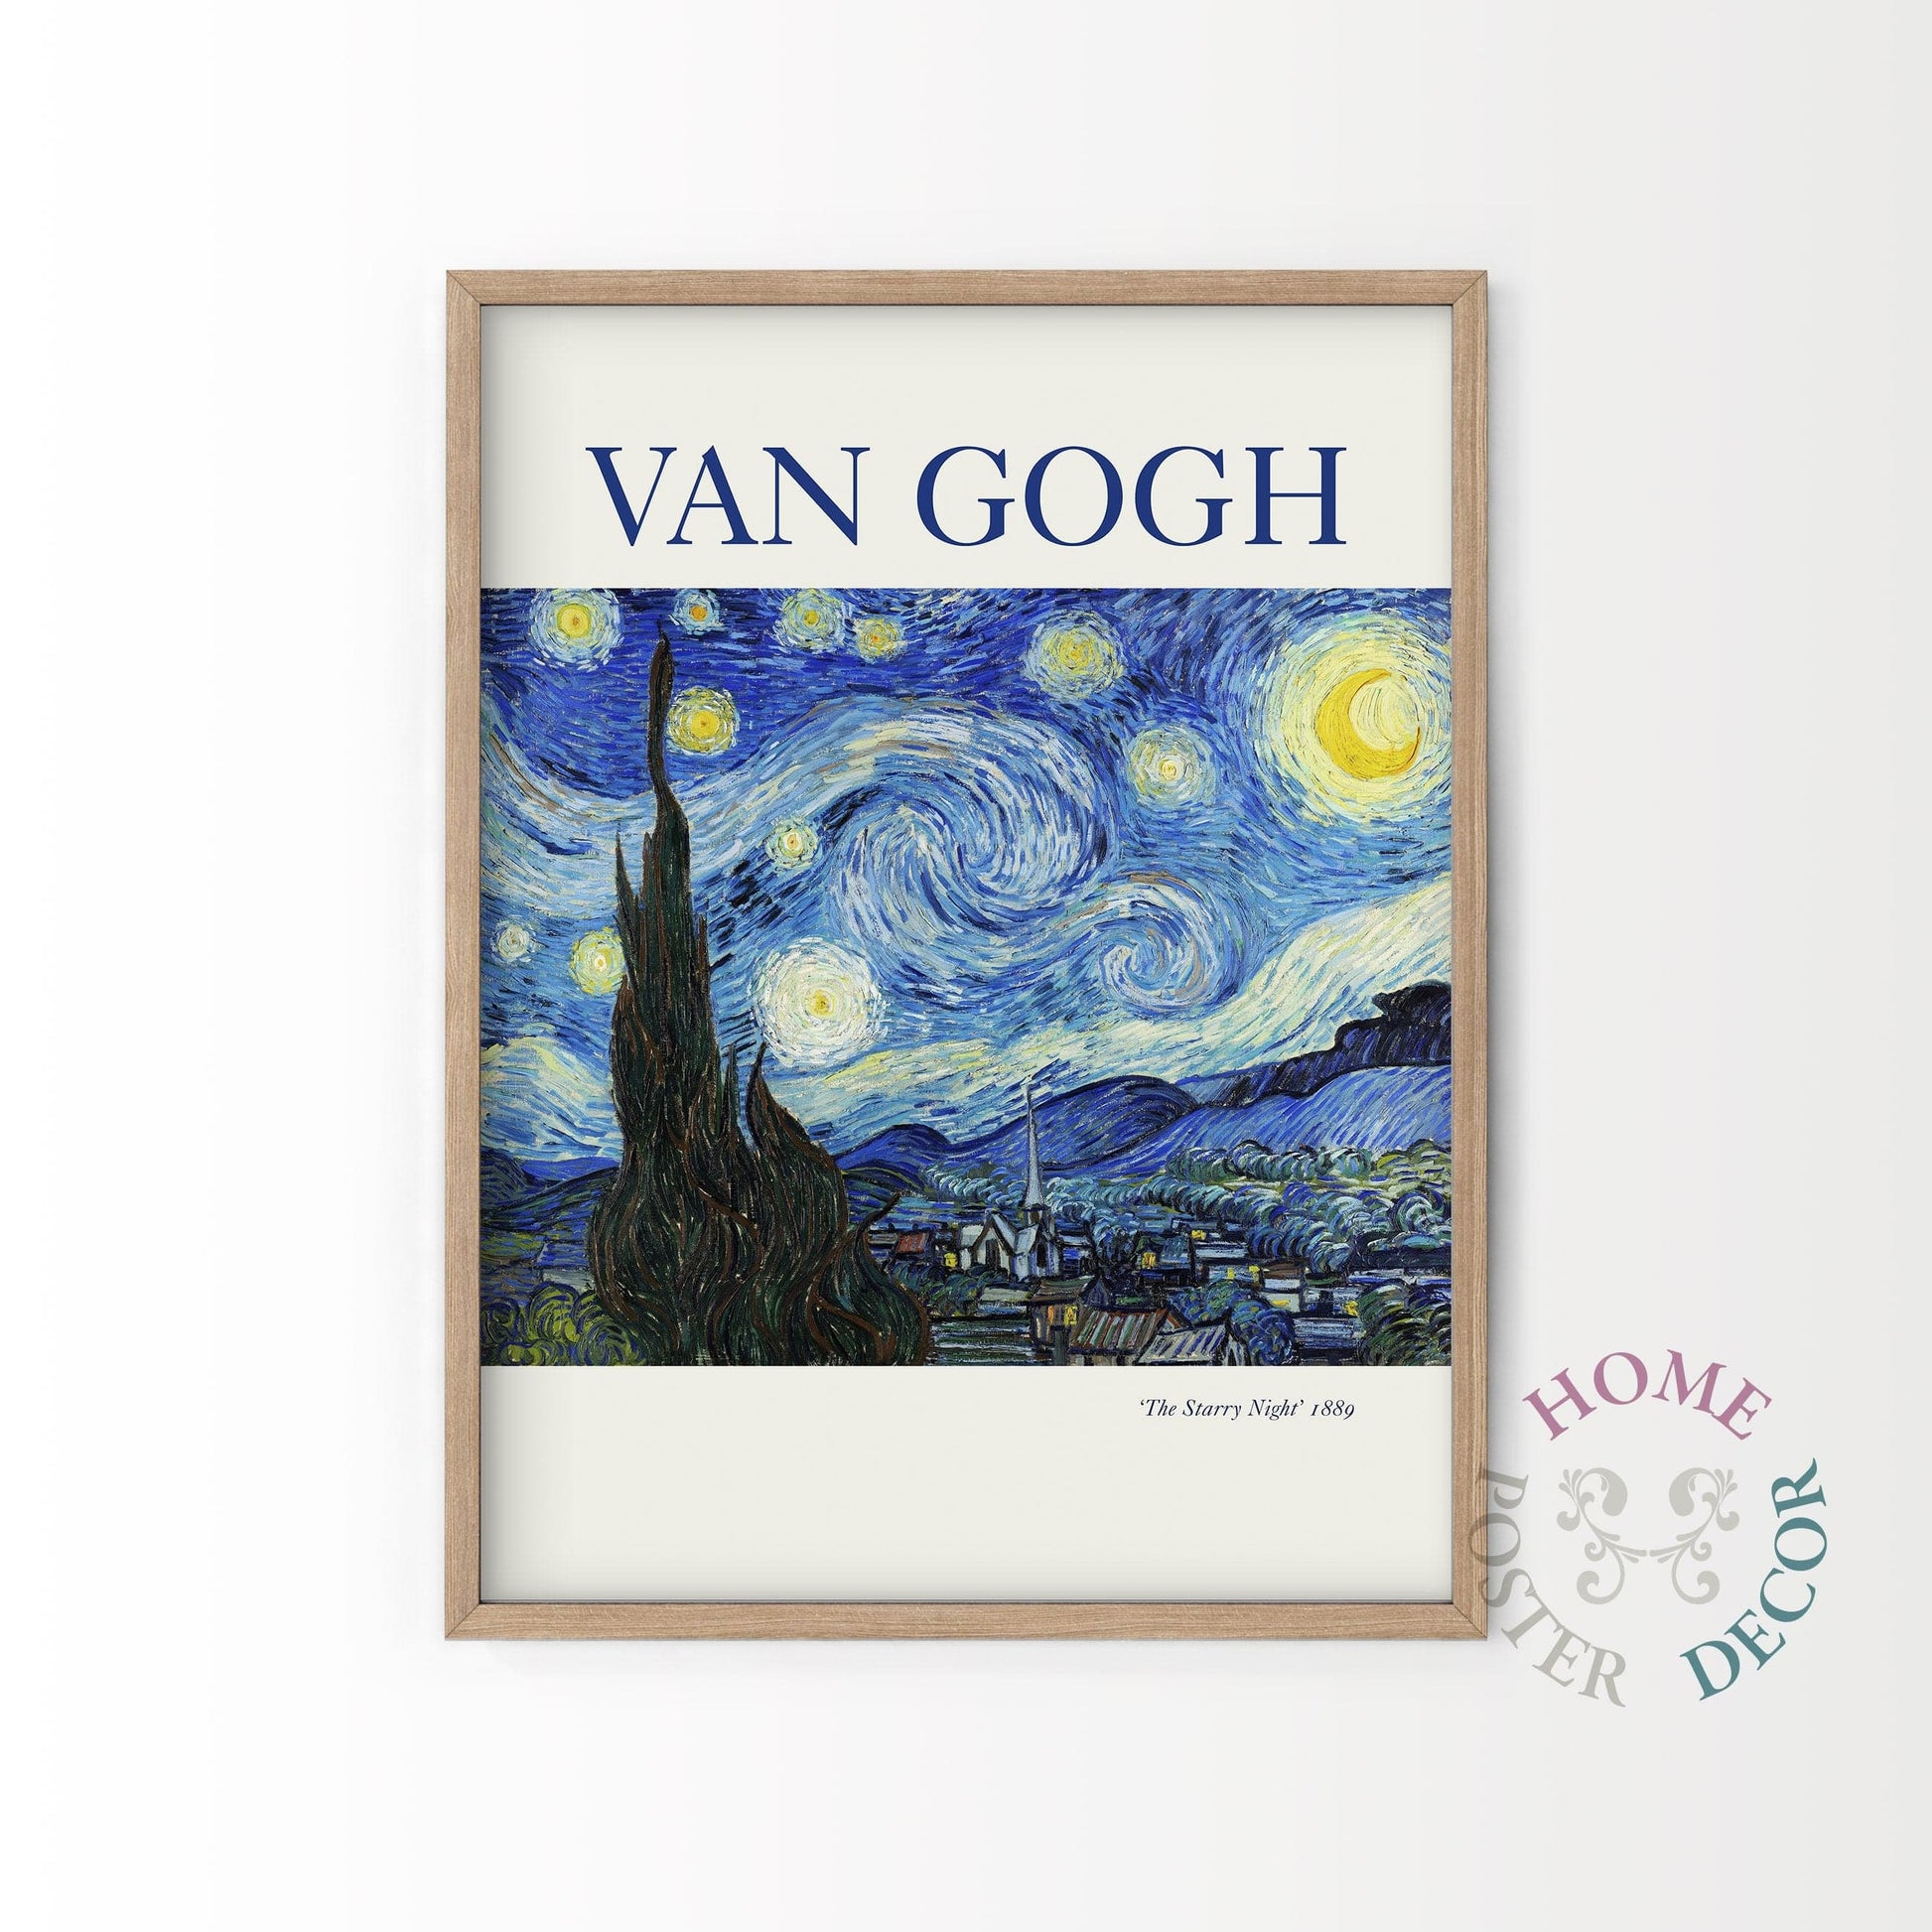 Home Poster Decor Van Gogh Poster, The Starry Night 1889, Van Gogh Painting, Famous Painting, Post-impressionist, Modern Print, Wedding Gift